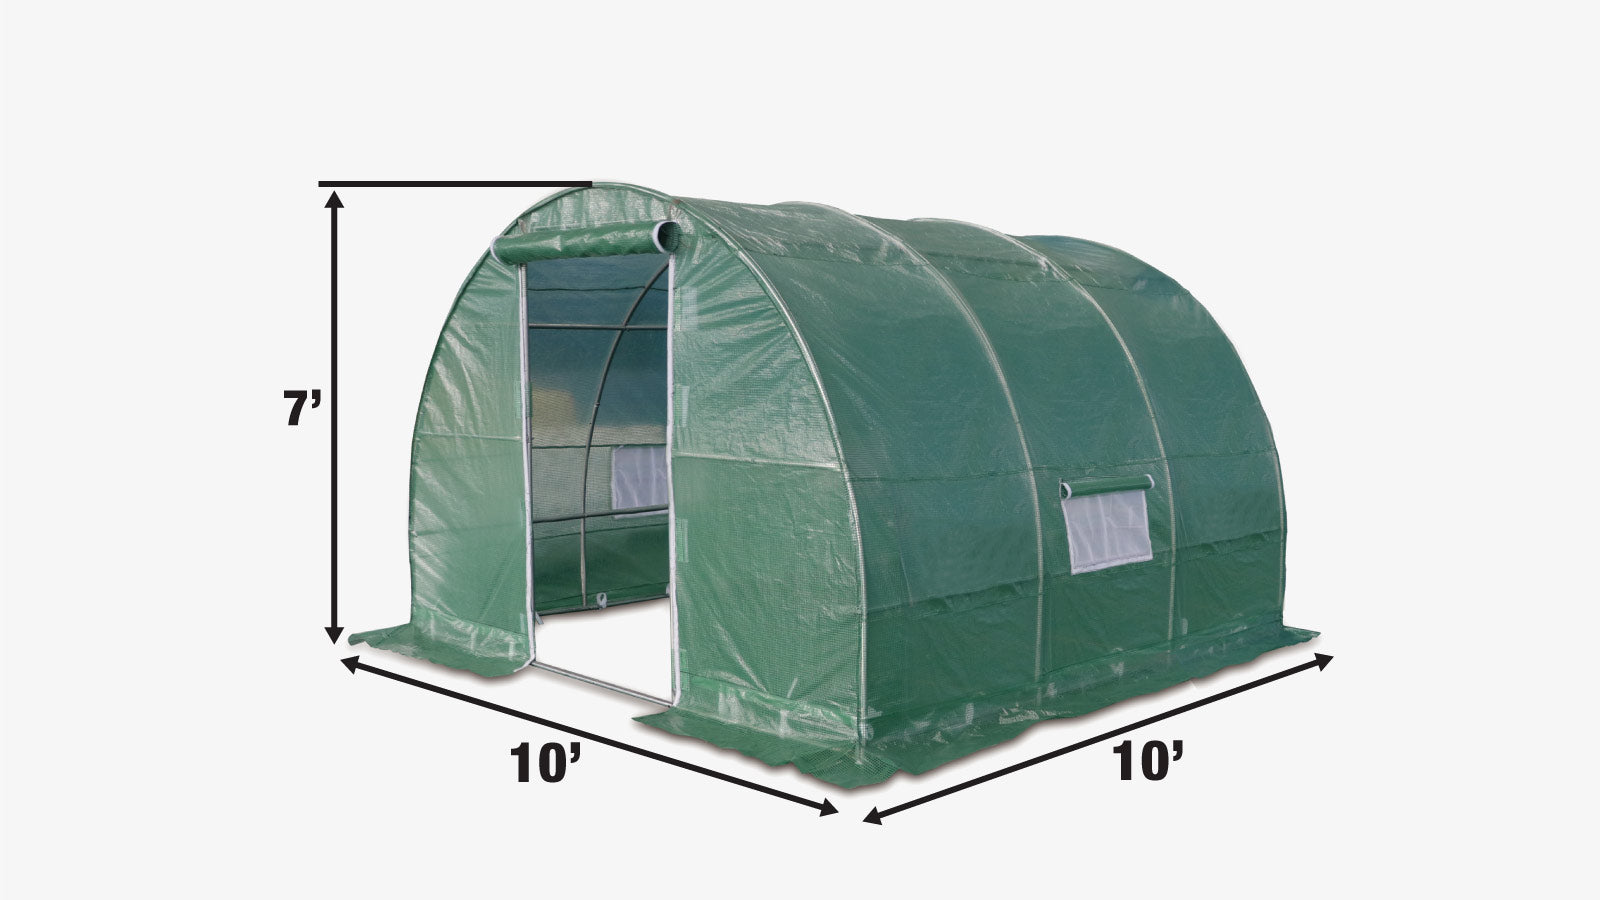 TMG Industrial 10’ x 10’ Tunnel Greenhouse Grow Tent w/Ripstop Leno Cover, Cold Frame, Roll-Up Mesh Windows, Round Top Roof, TMG-GH1010R-specifications-image